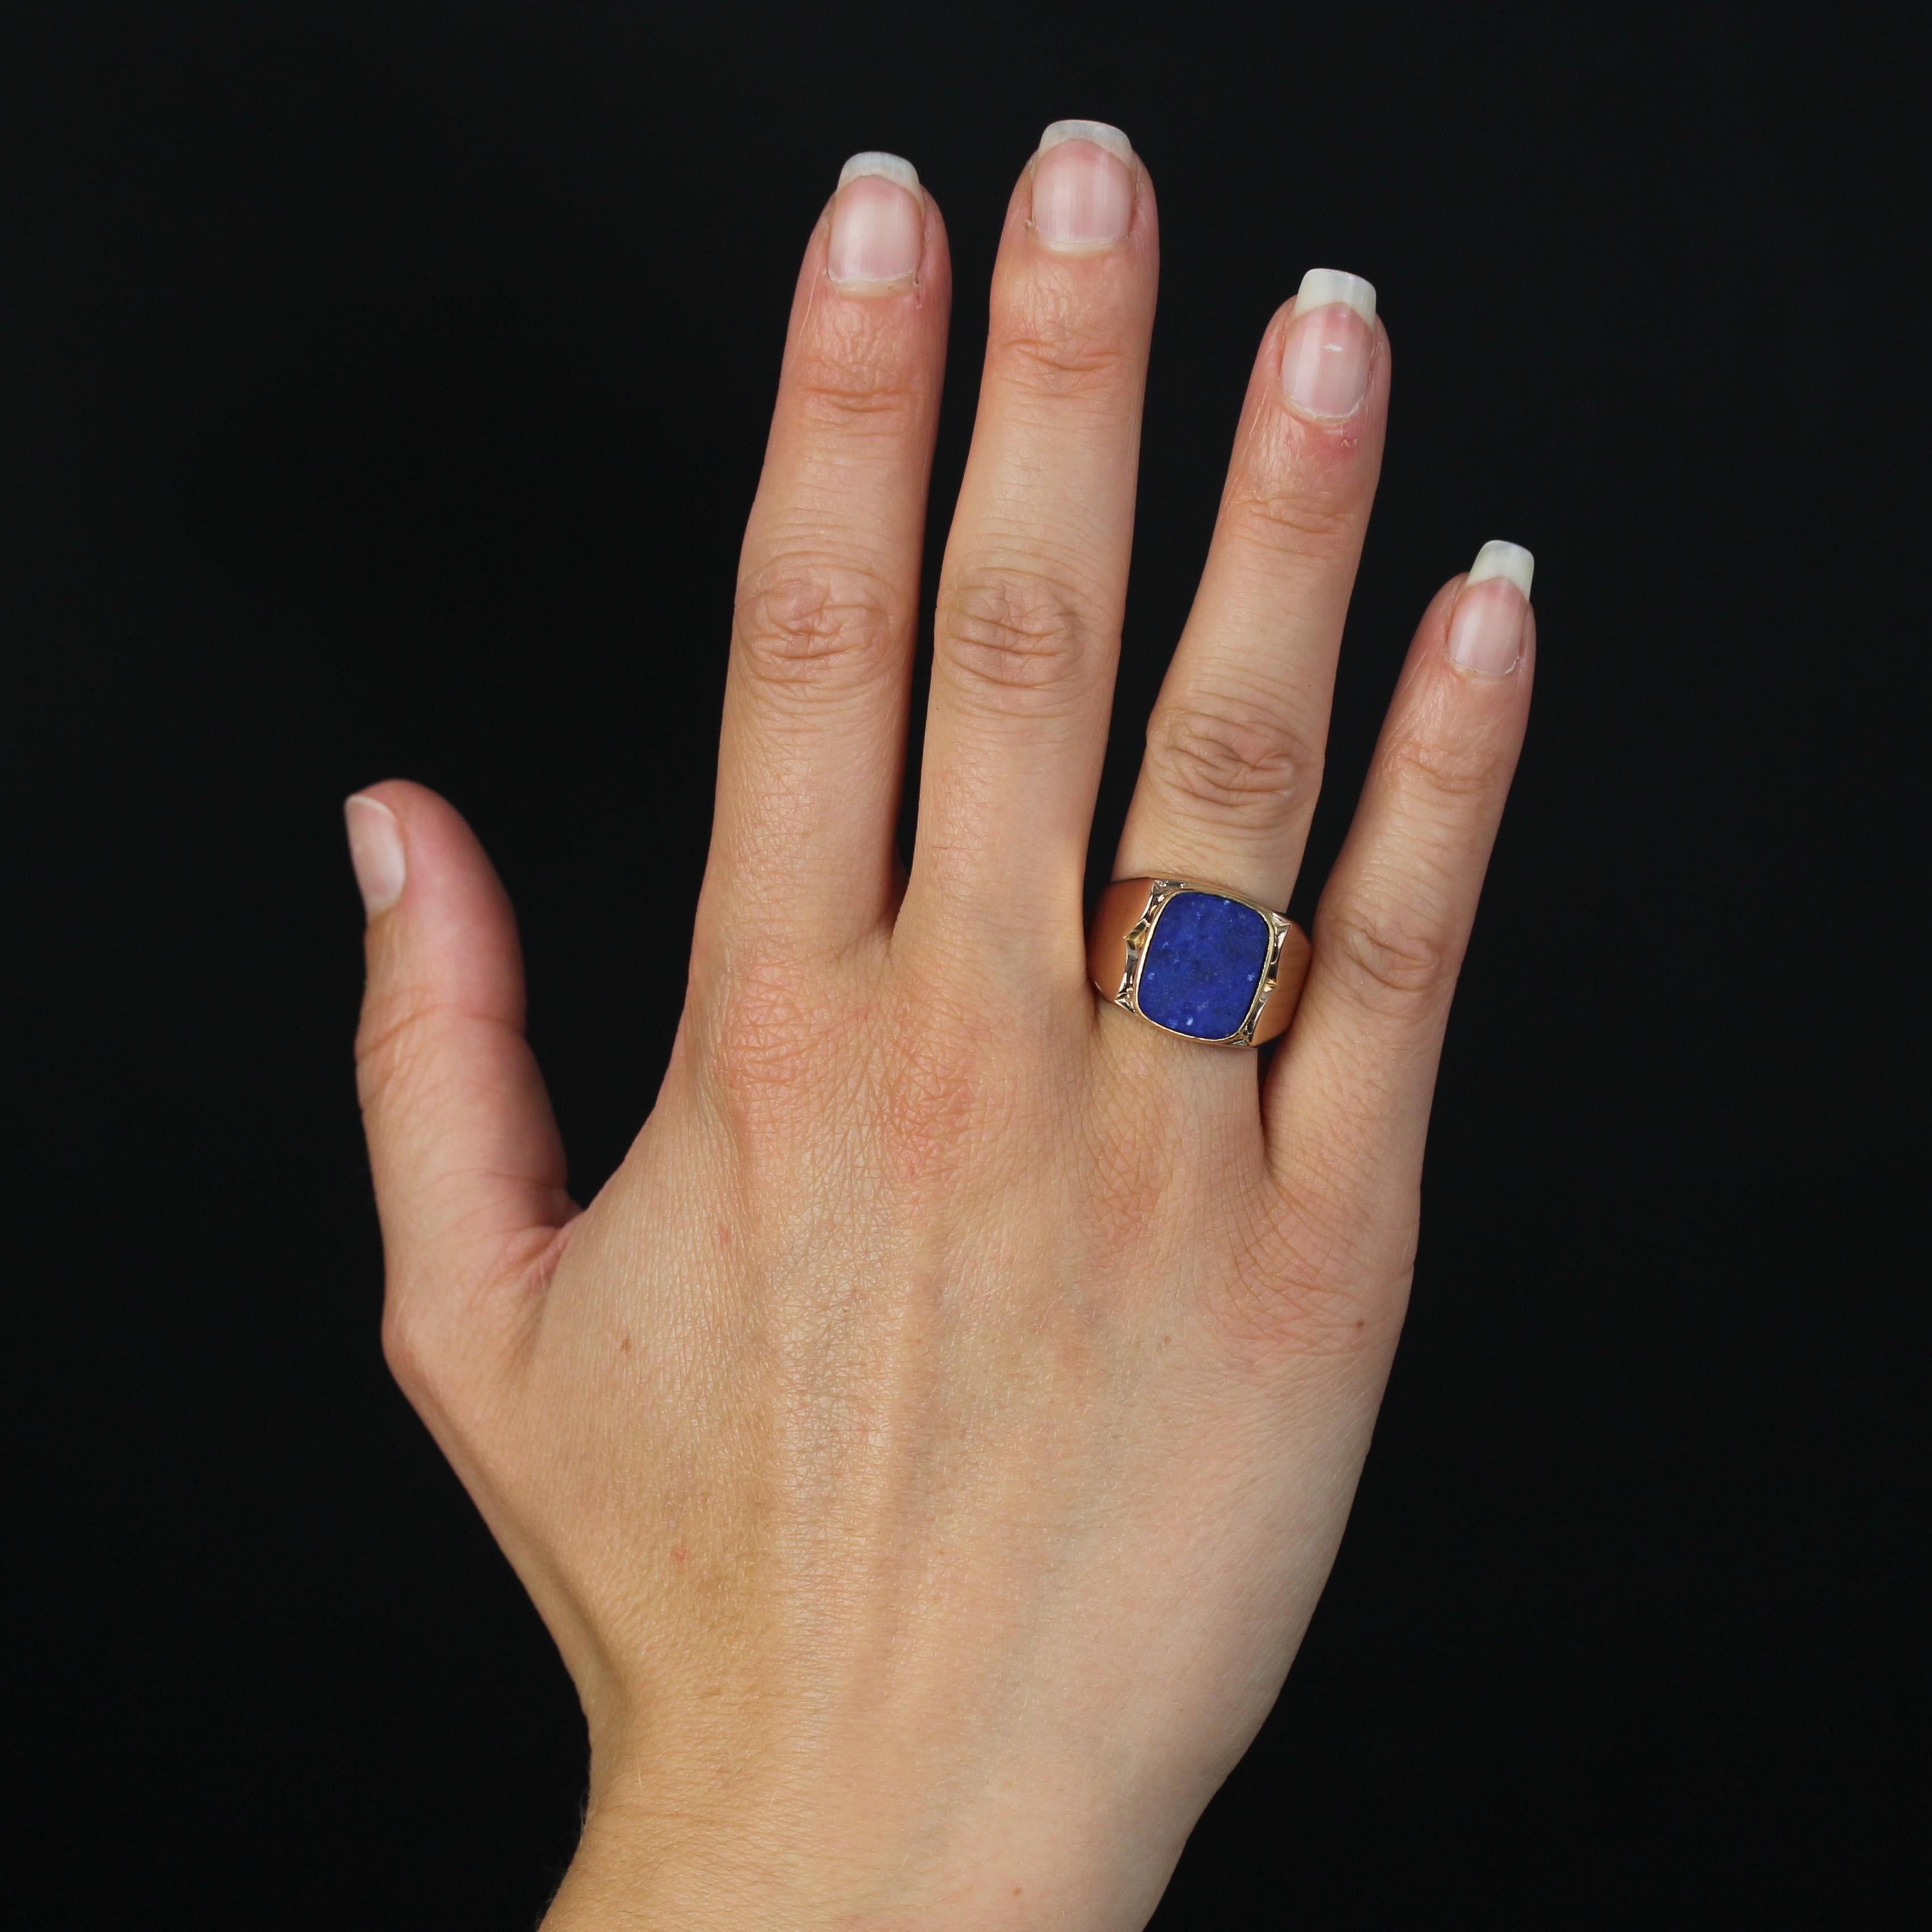 Ring in 18 karat yellow gold, eagle head hallmark.
A sublime antique men's signet ring adorned with flat, matte, close-set lapis lazuli. On either side, the start of the ring is adorned with a large palmette.
Total weight of lapis-lazuli : 4.30